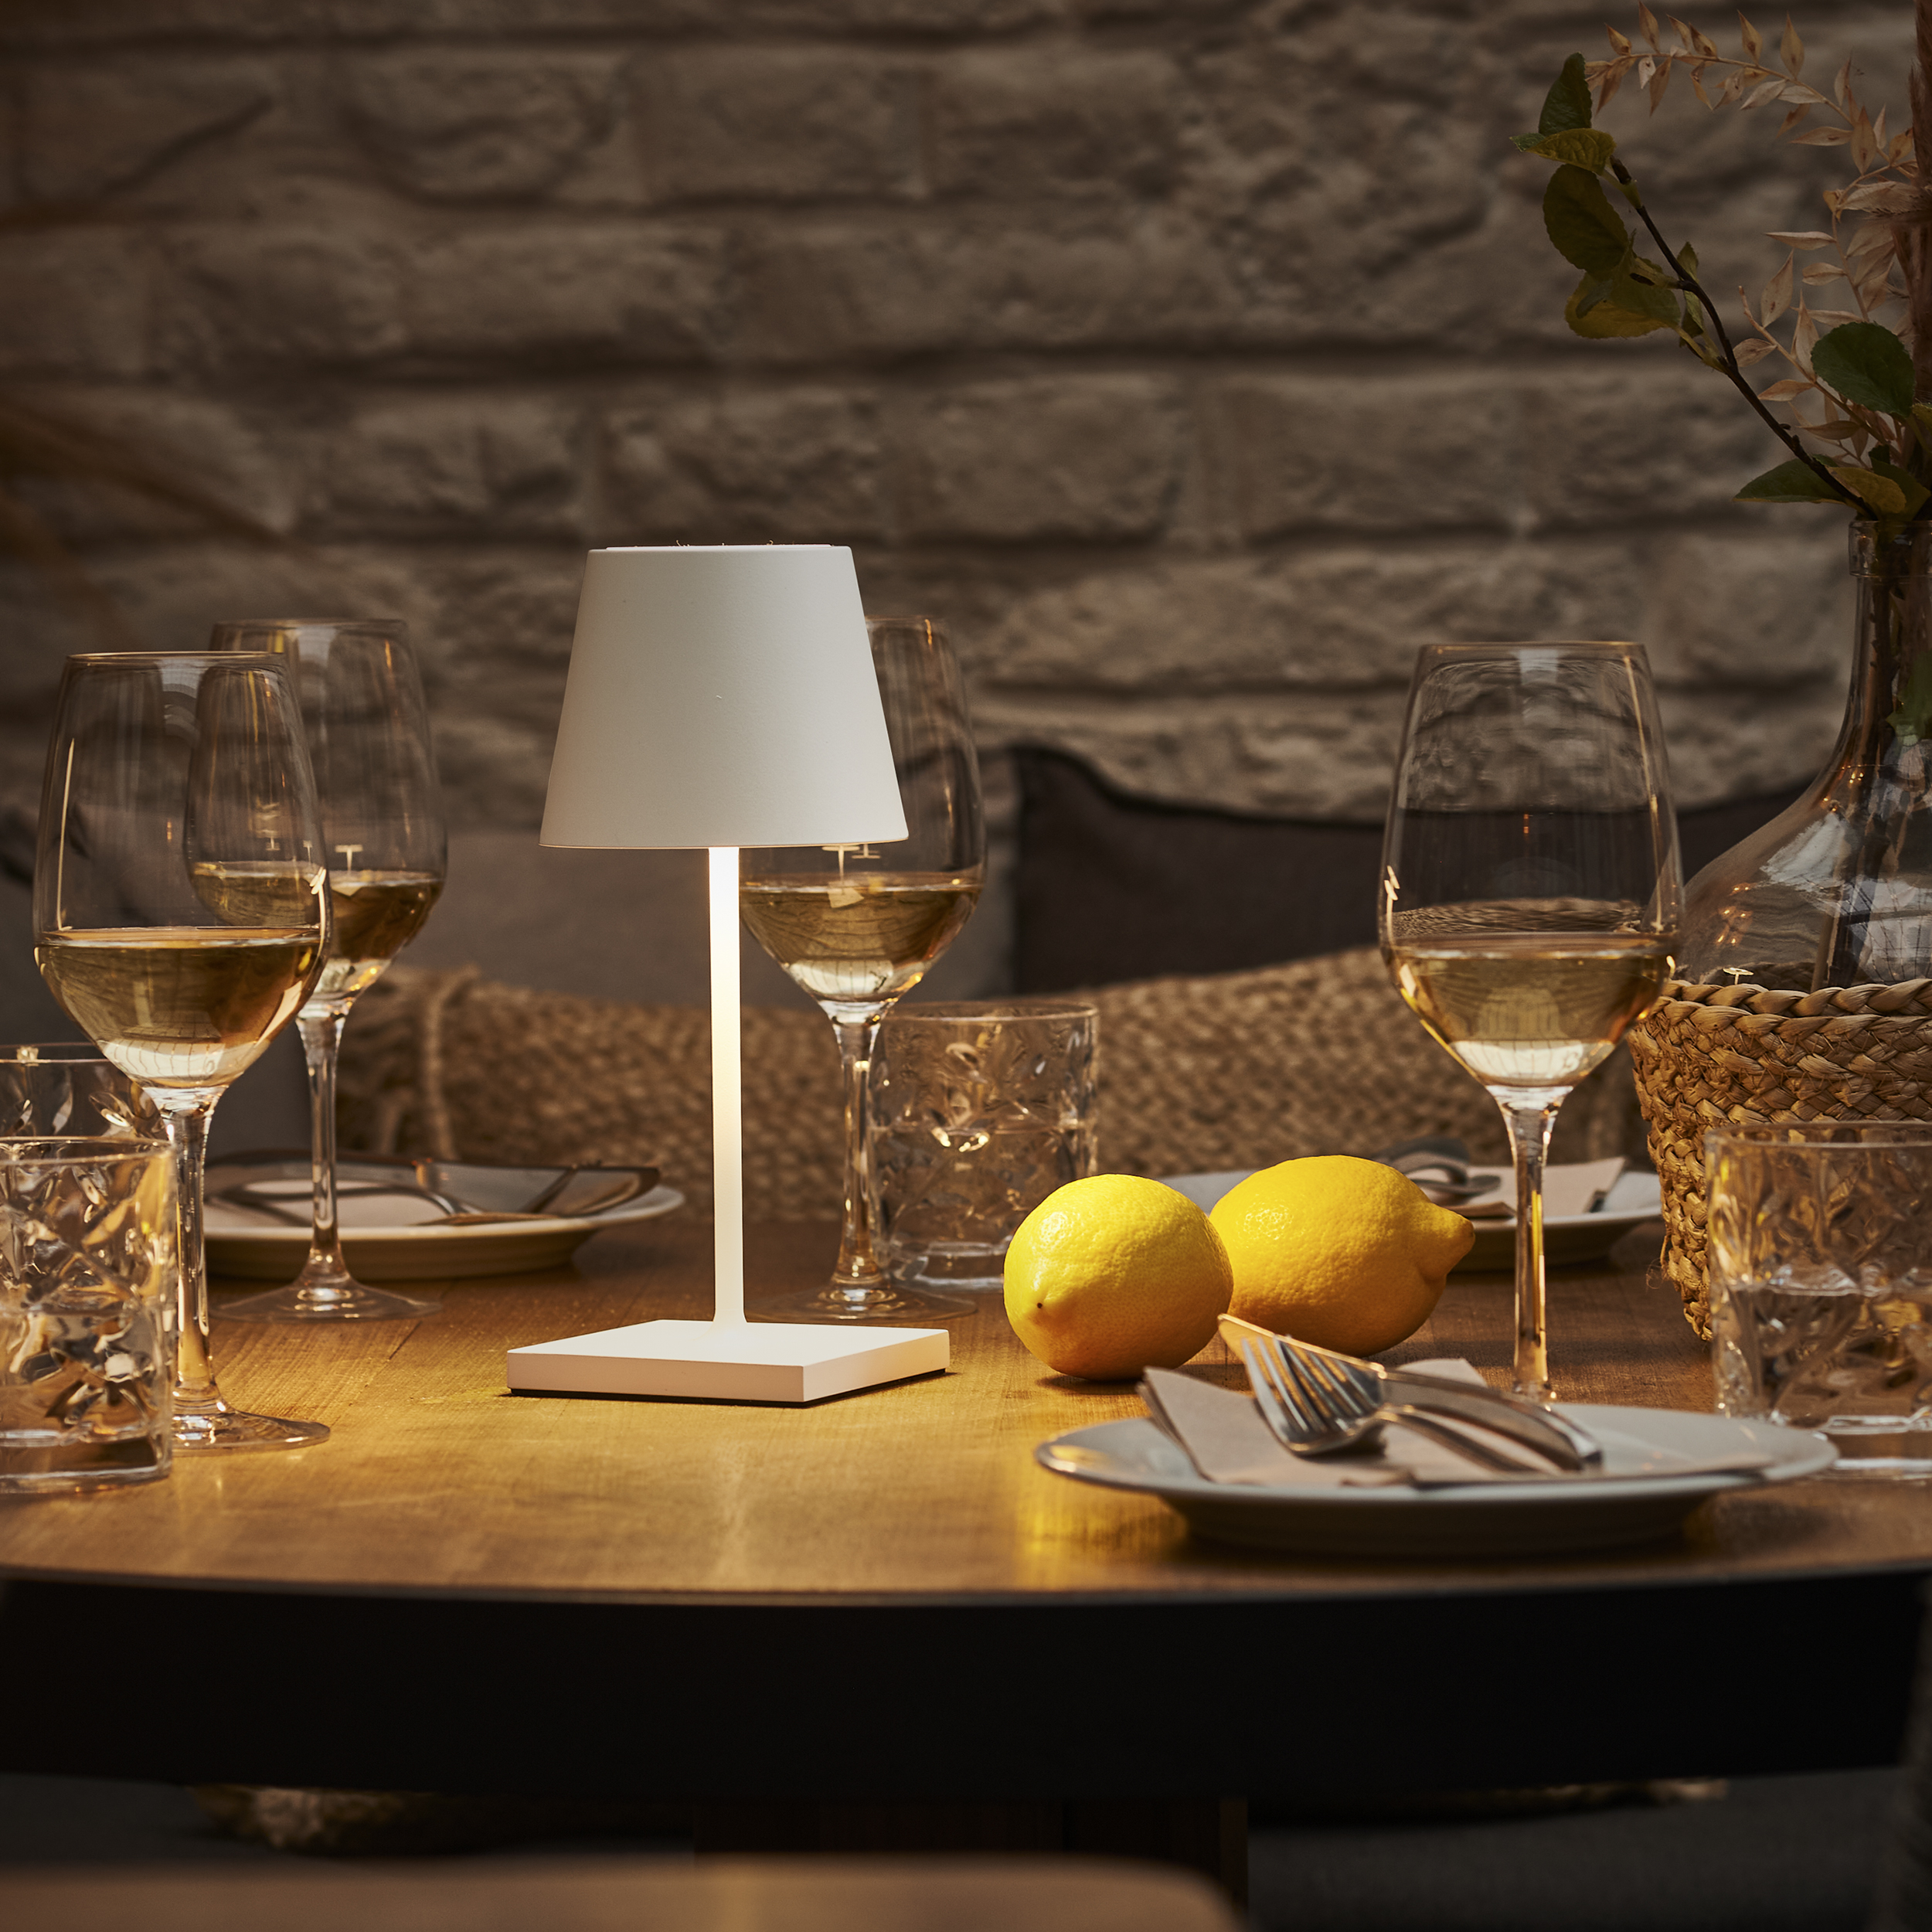 SIGOR NUINDIE Mini Schneeweiss warmweiss Lamp Table LED